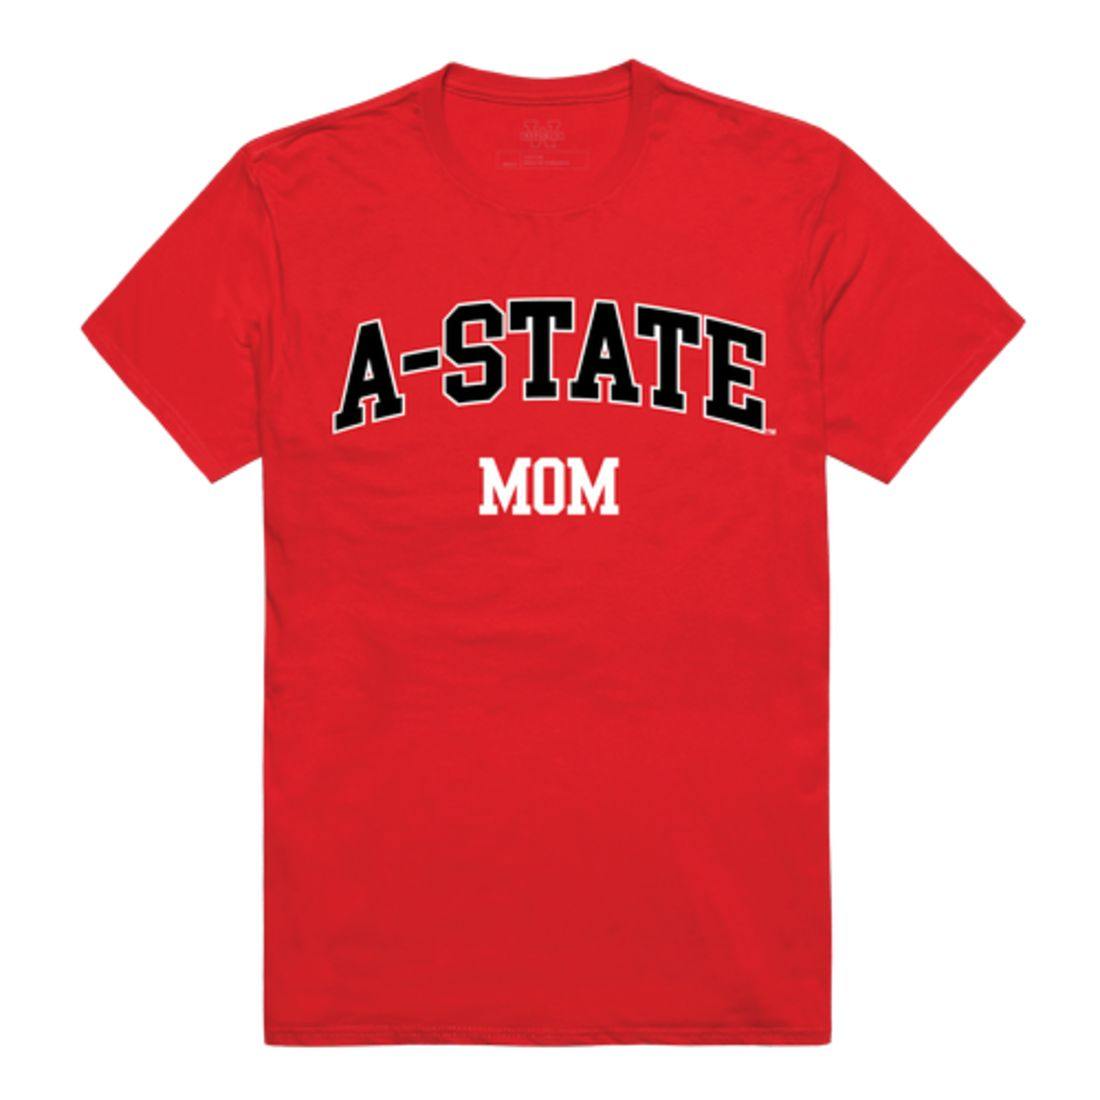 Arkansas State University A-State Wolves College Mom Womens T-Shirt-Campus-Wardrobe